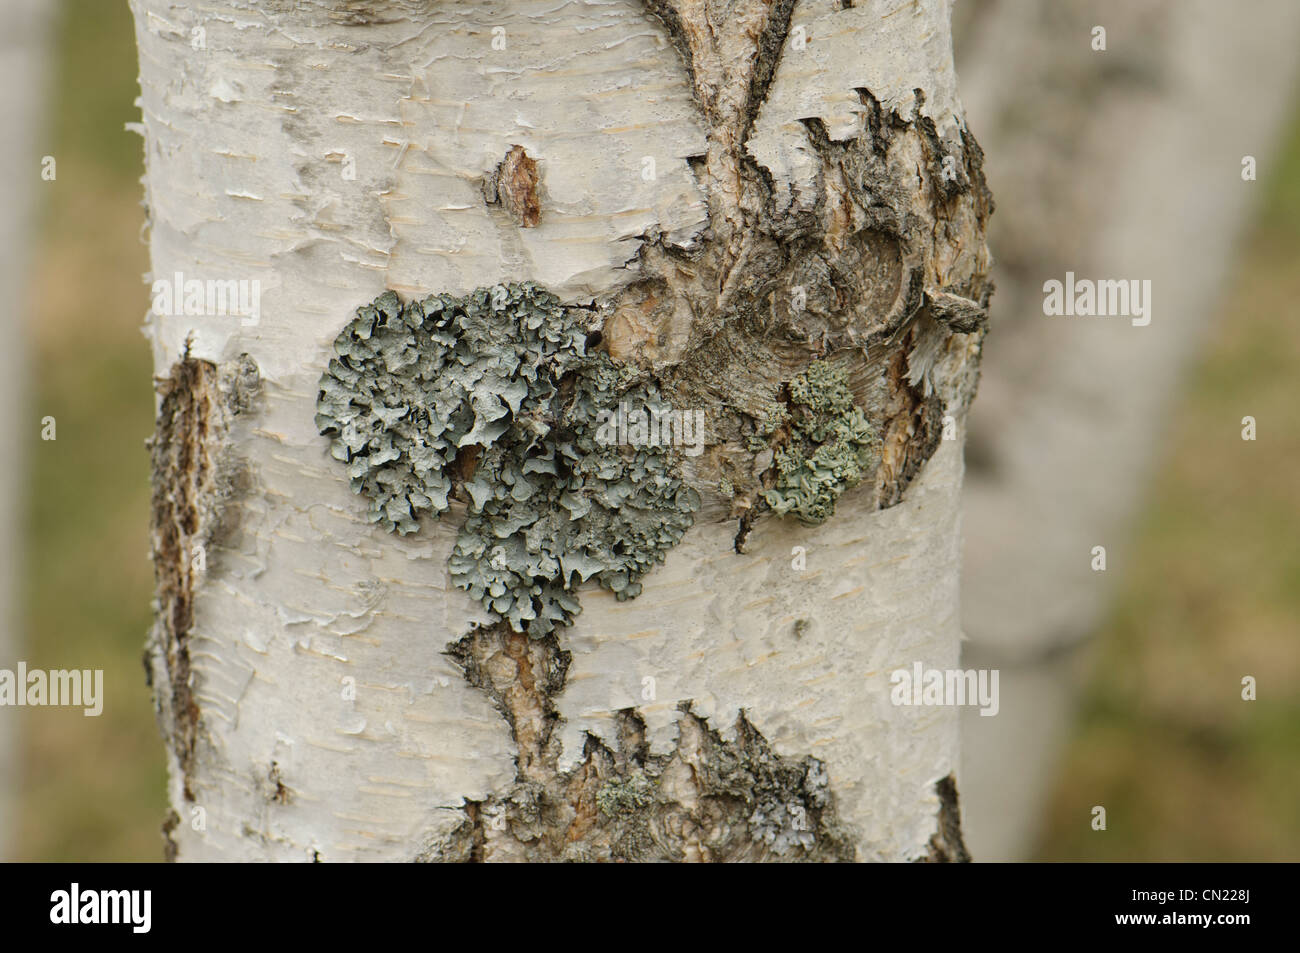 Lichens growing on the bark of Birch trees (Betula verrucosa), France Stock Photo